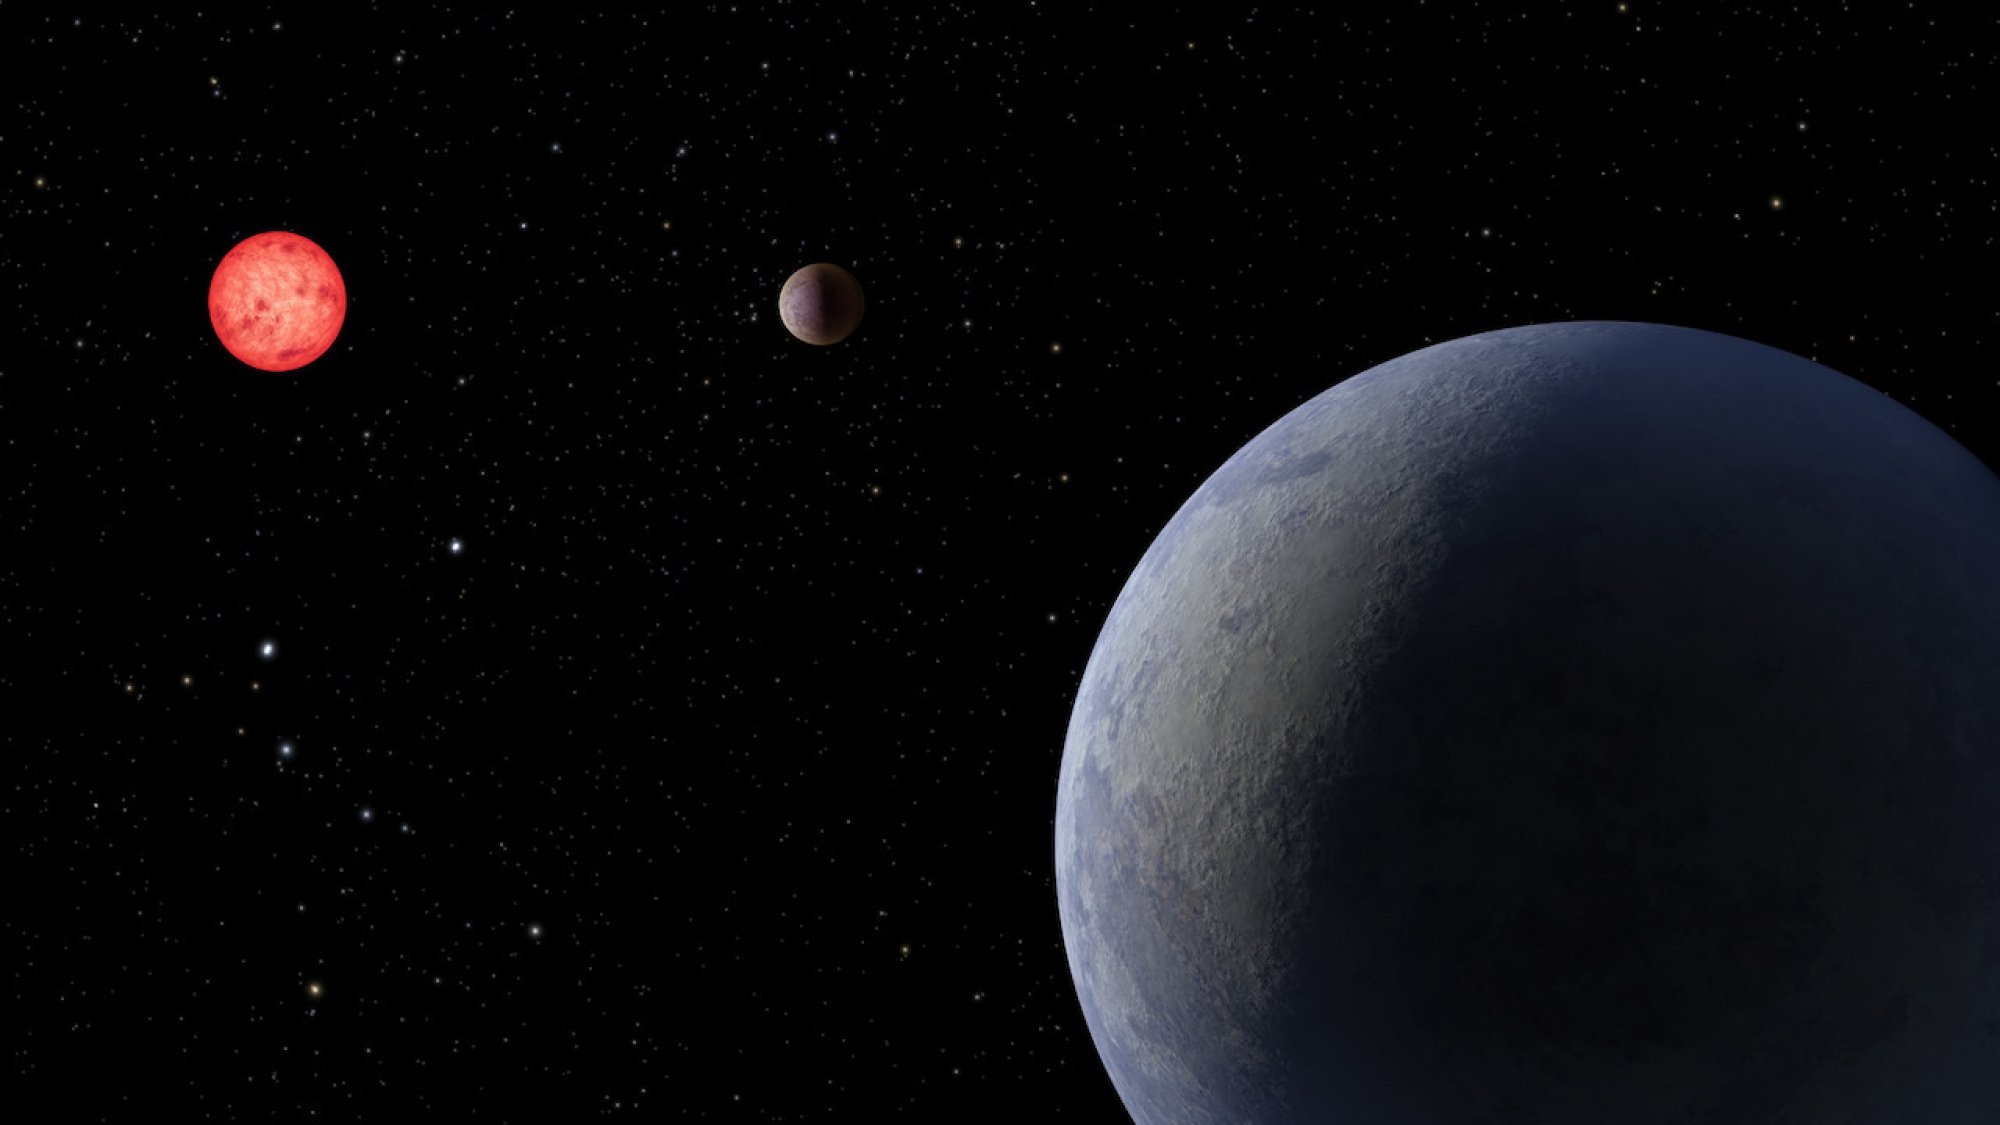 on right, a bluish Earth-like "super-Earth"